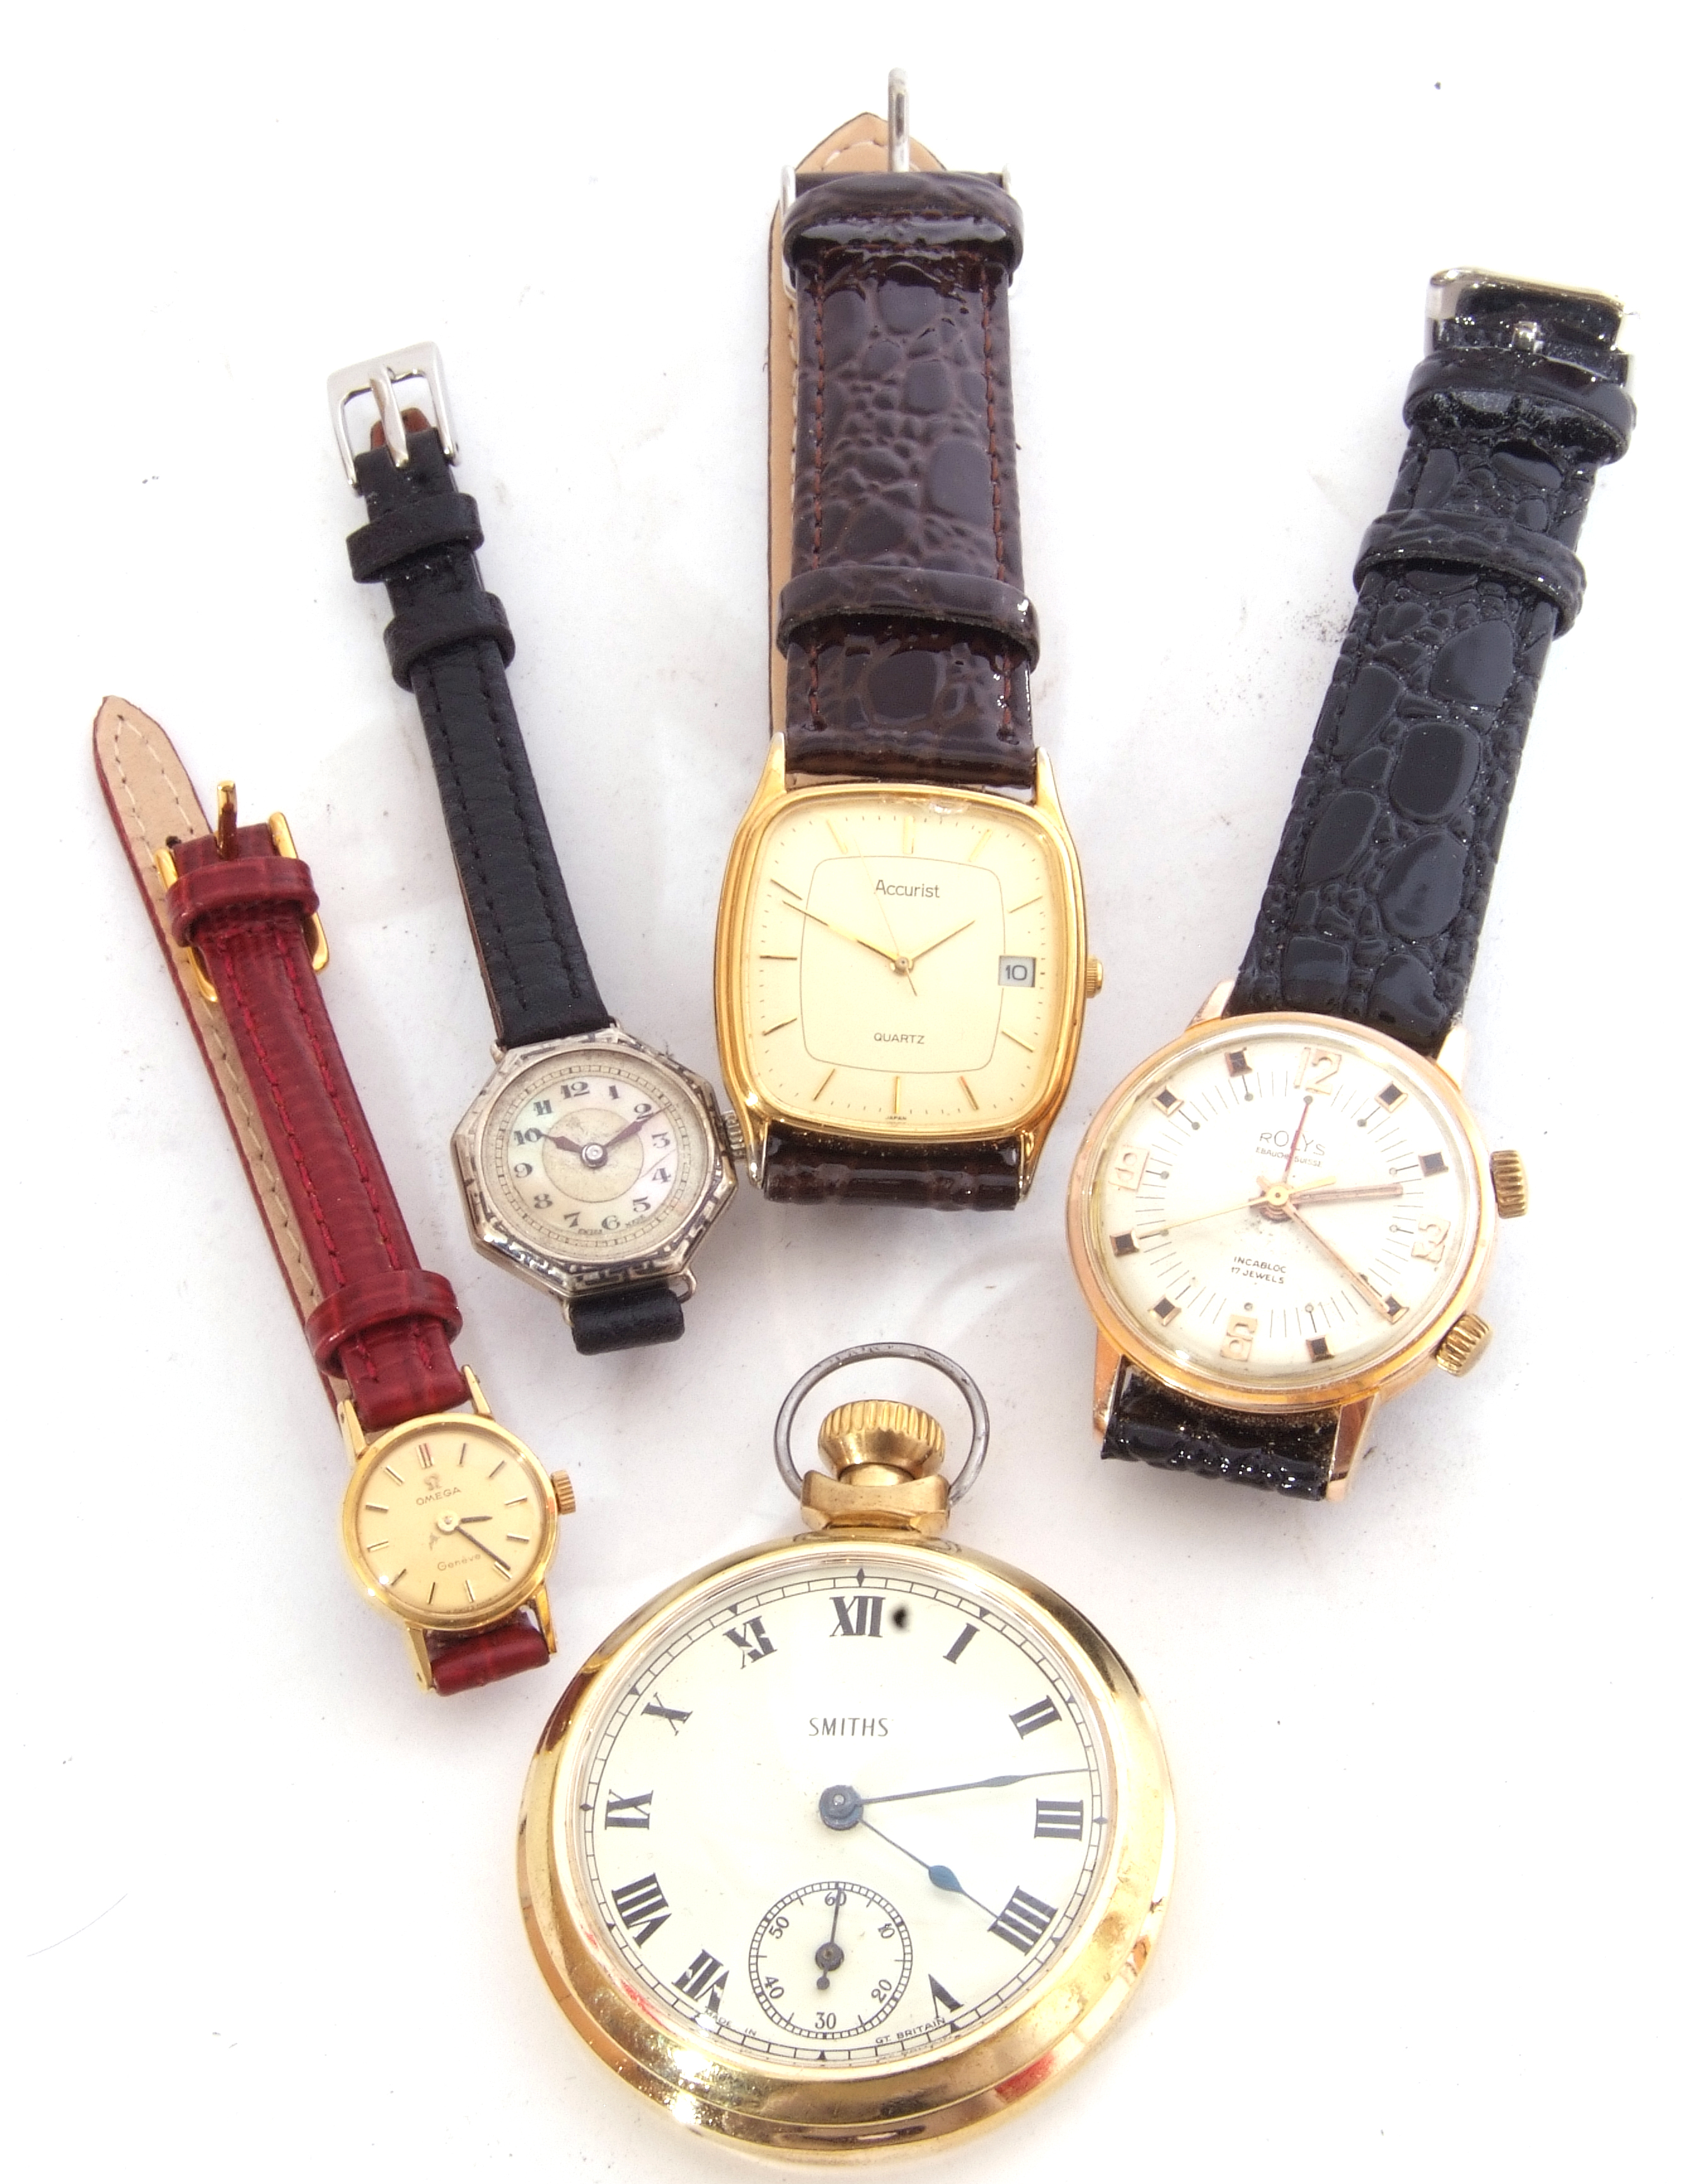 Mixed Lot: gents gold plated cased Smiths pocket watch with button wind, two wrist watches by - Image 2 of 6